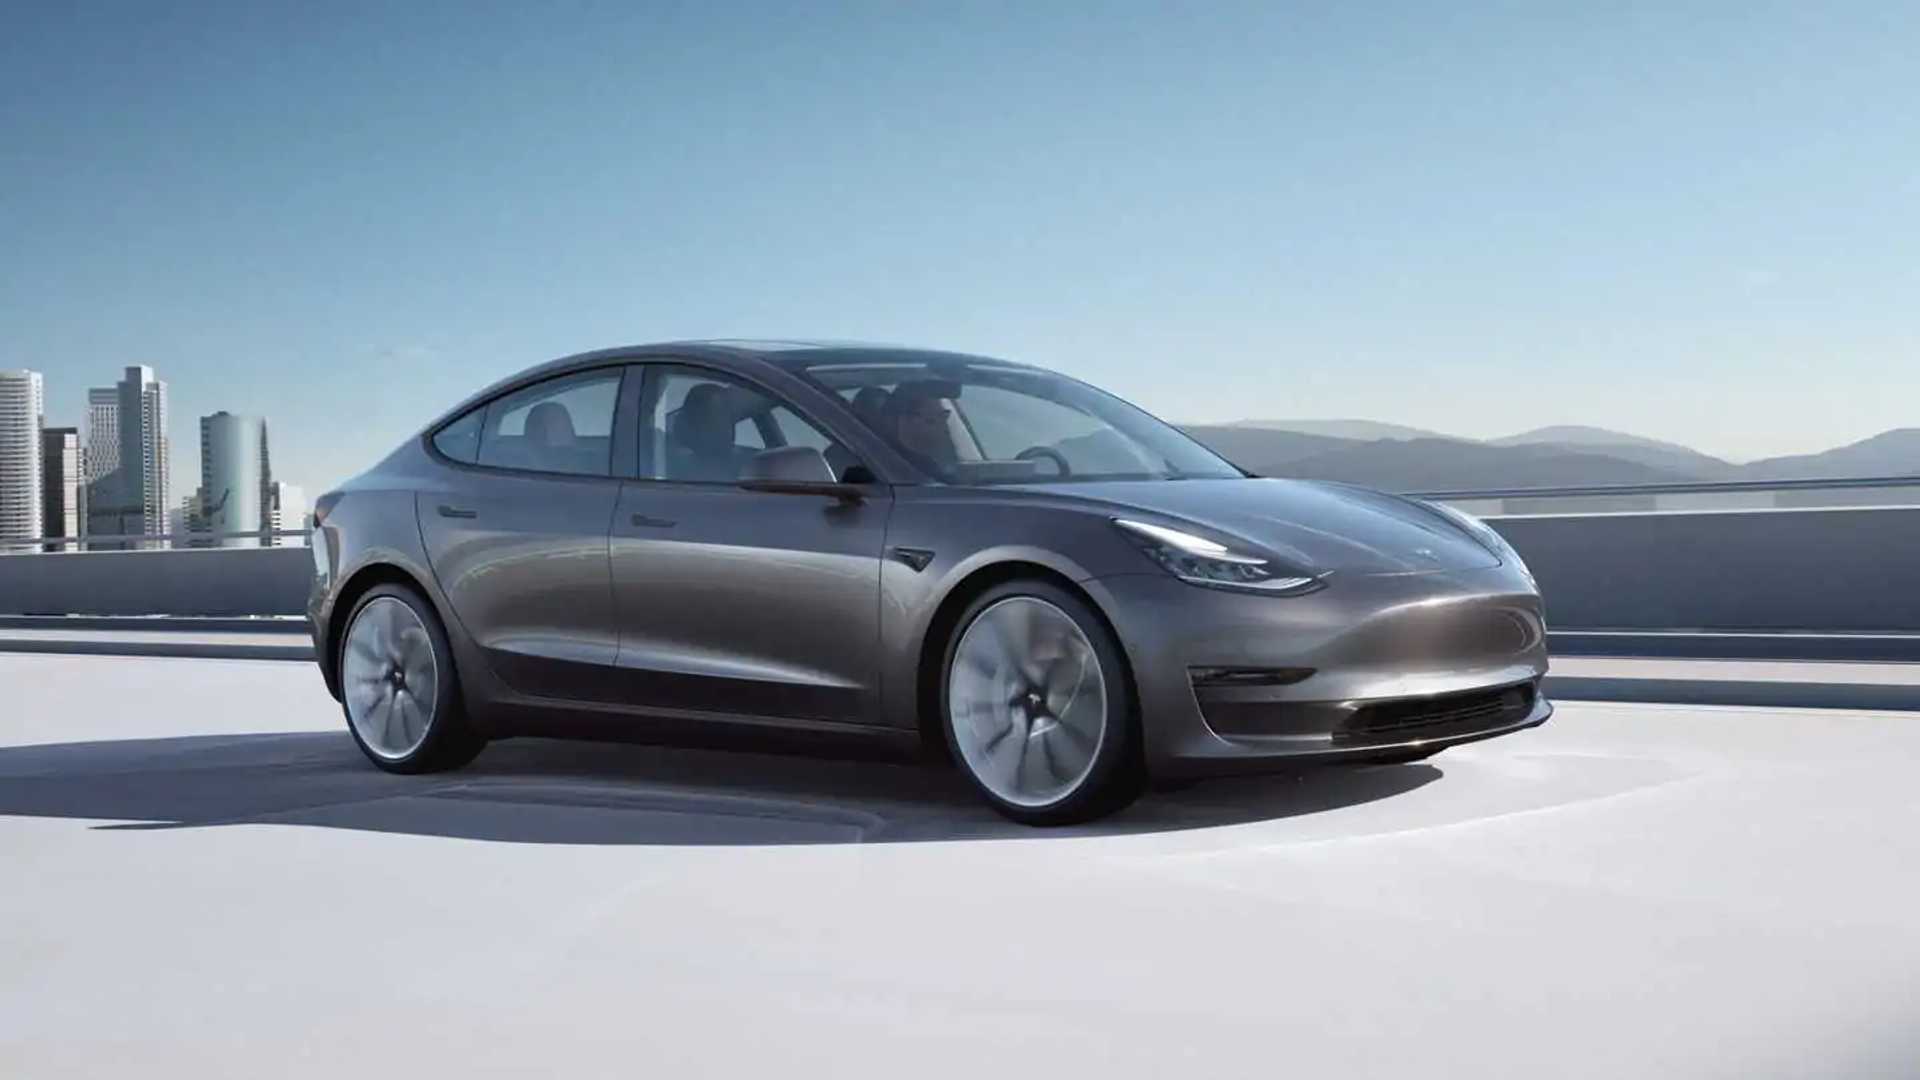 teslas banned from parts of chinese city ahead of xi visit: report